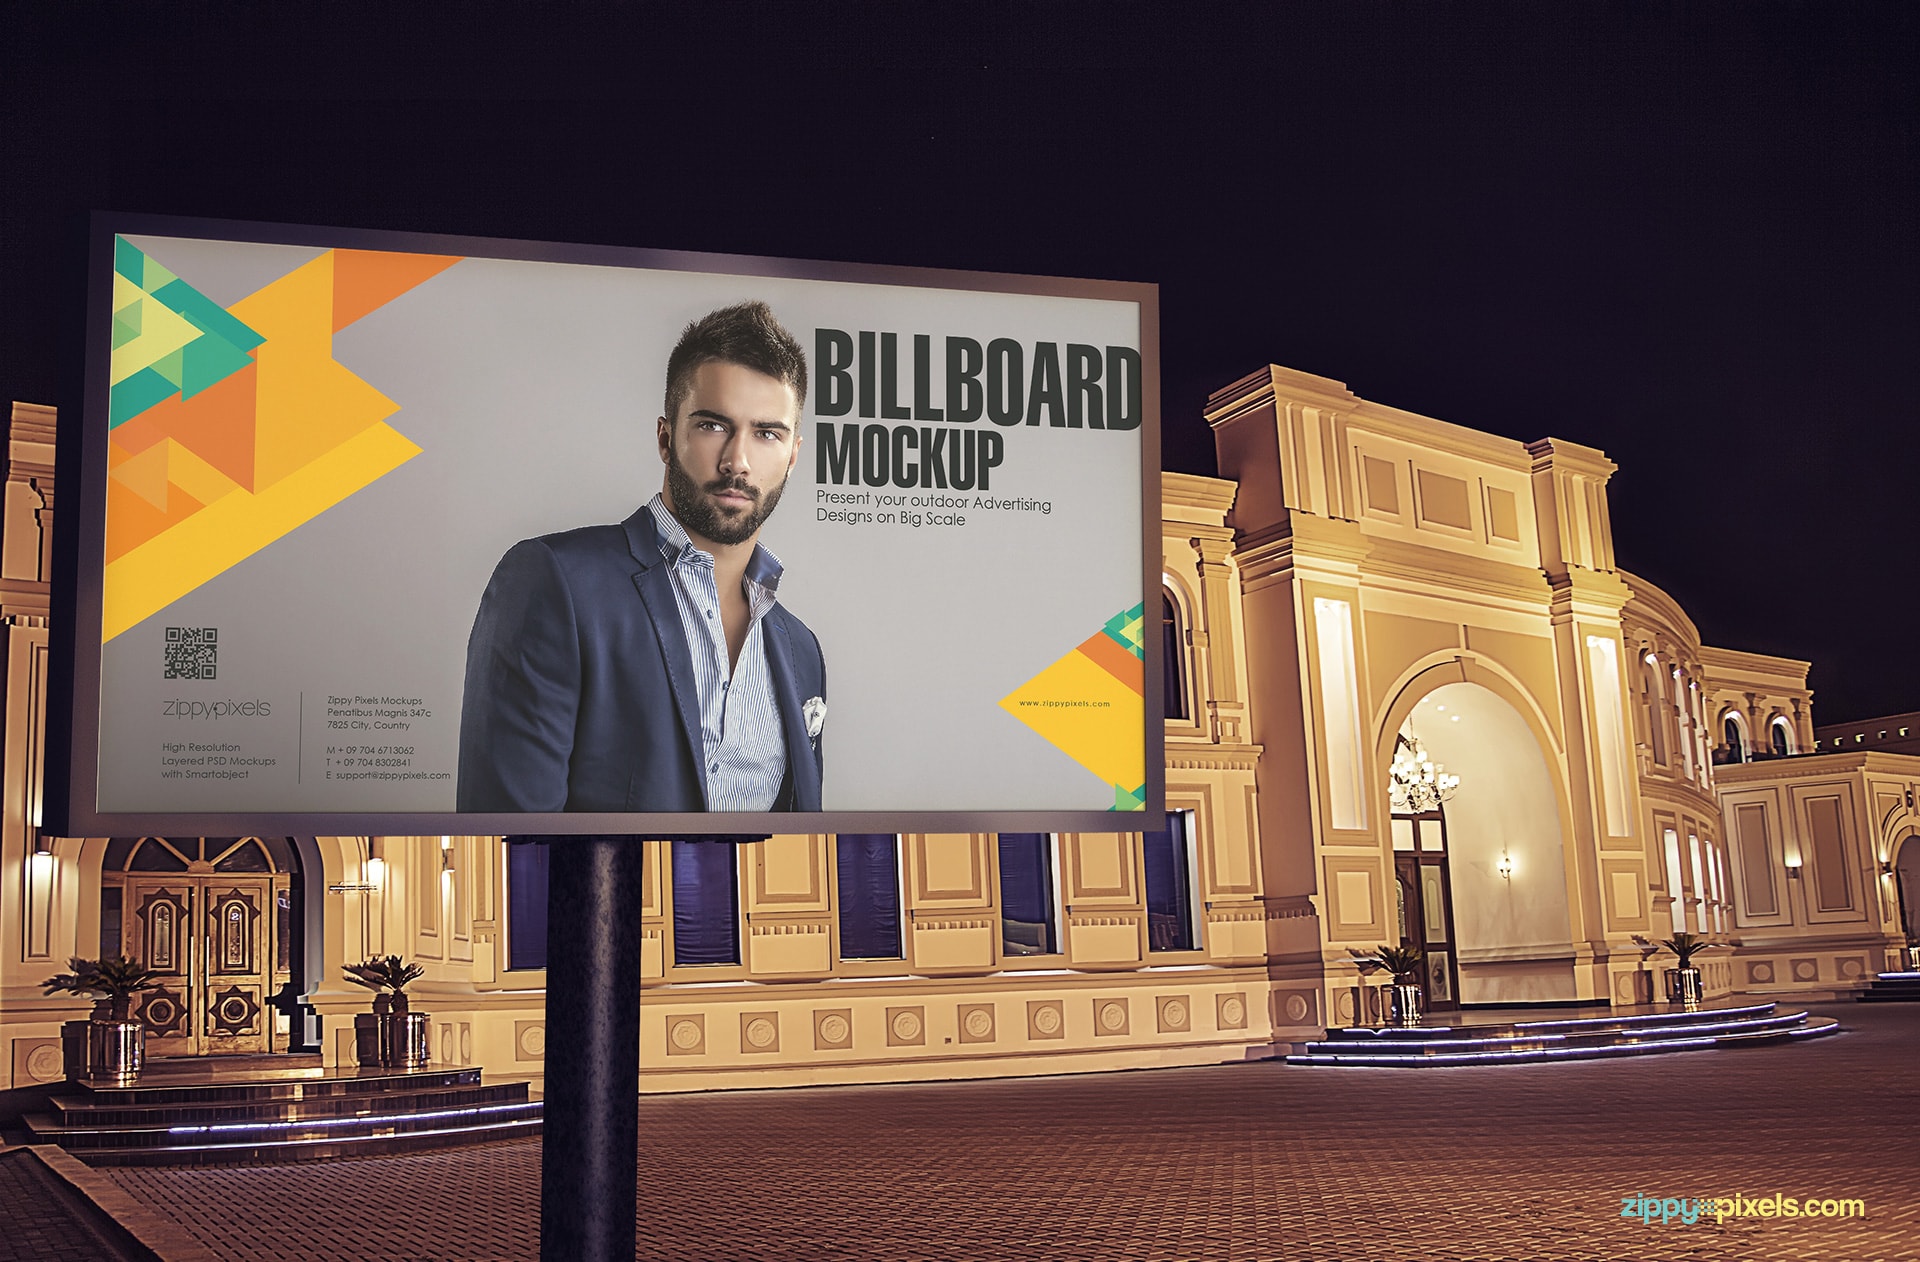 Medium size billboard with a beautiful building in the background